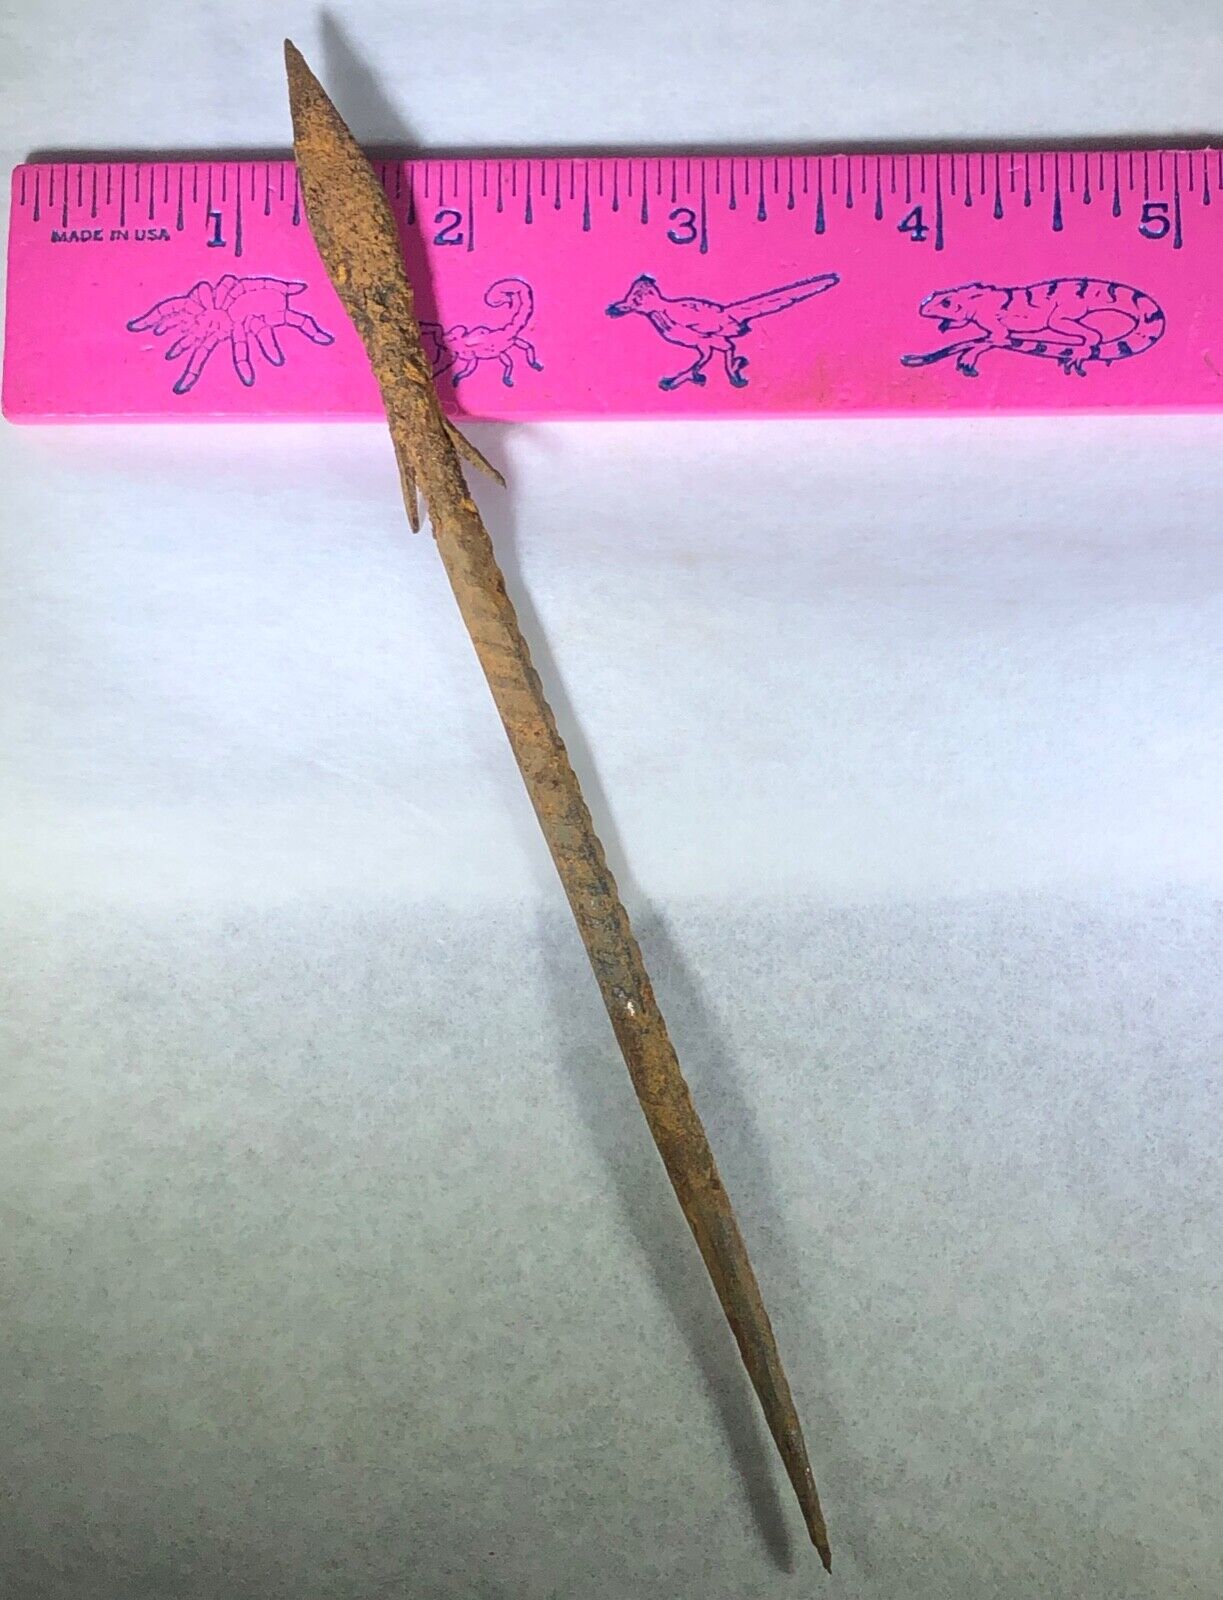 BURA CULTURE METAL SPEAR TIP POINT AUTHENTIC ARTIFACT NIGER VALLEY AFRICA 2